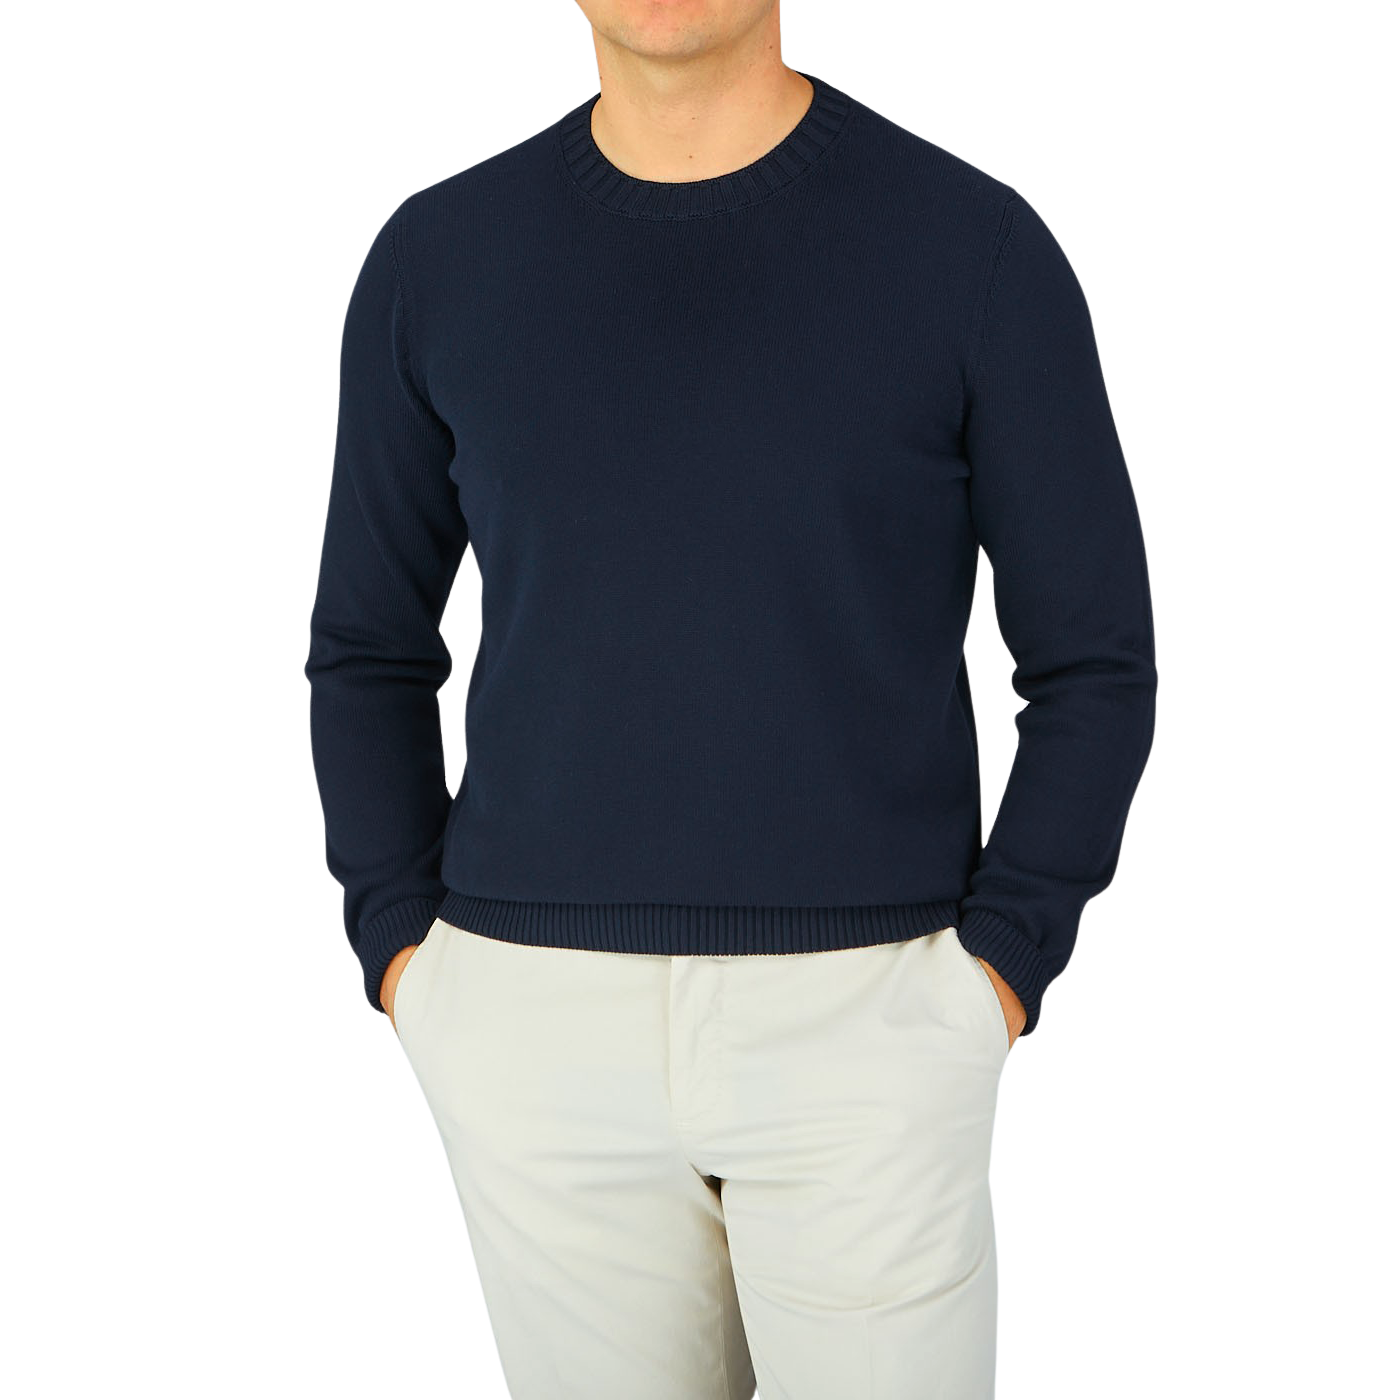 A man wearing a Navy Blue Egyptian Cotton Crewneck Sweater by Gran Sasso.